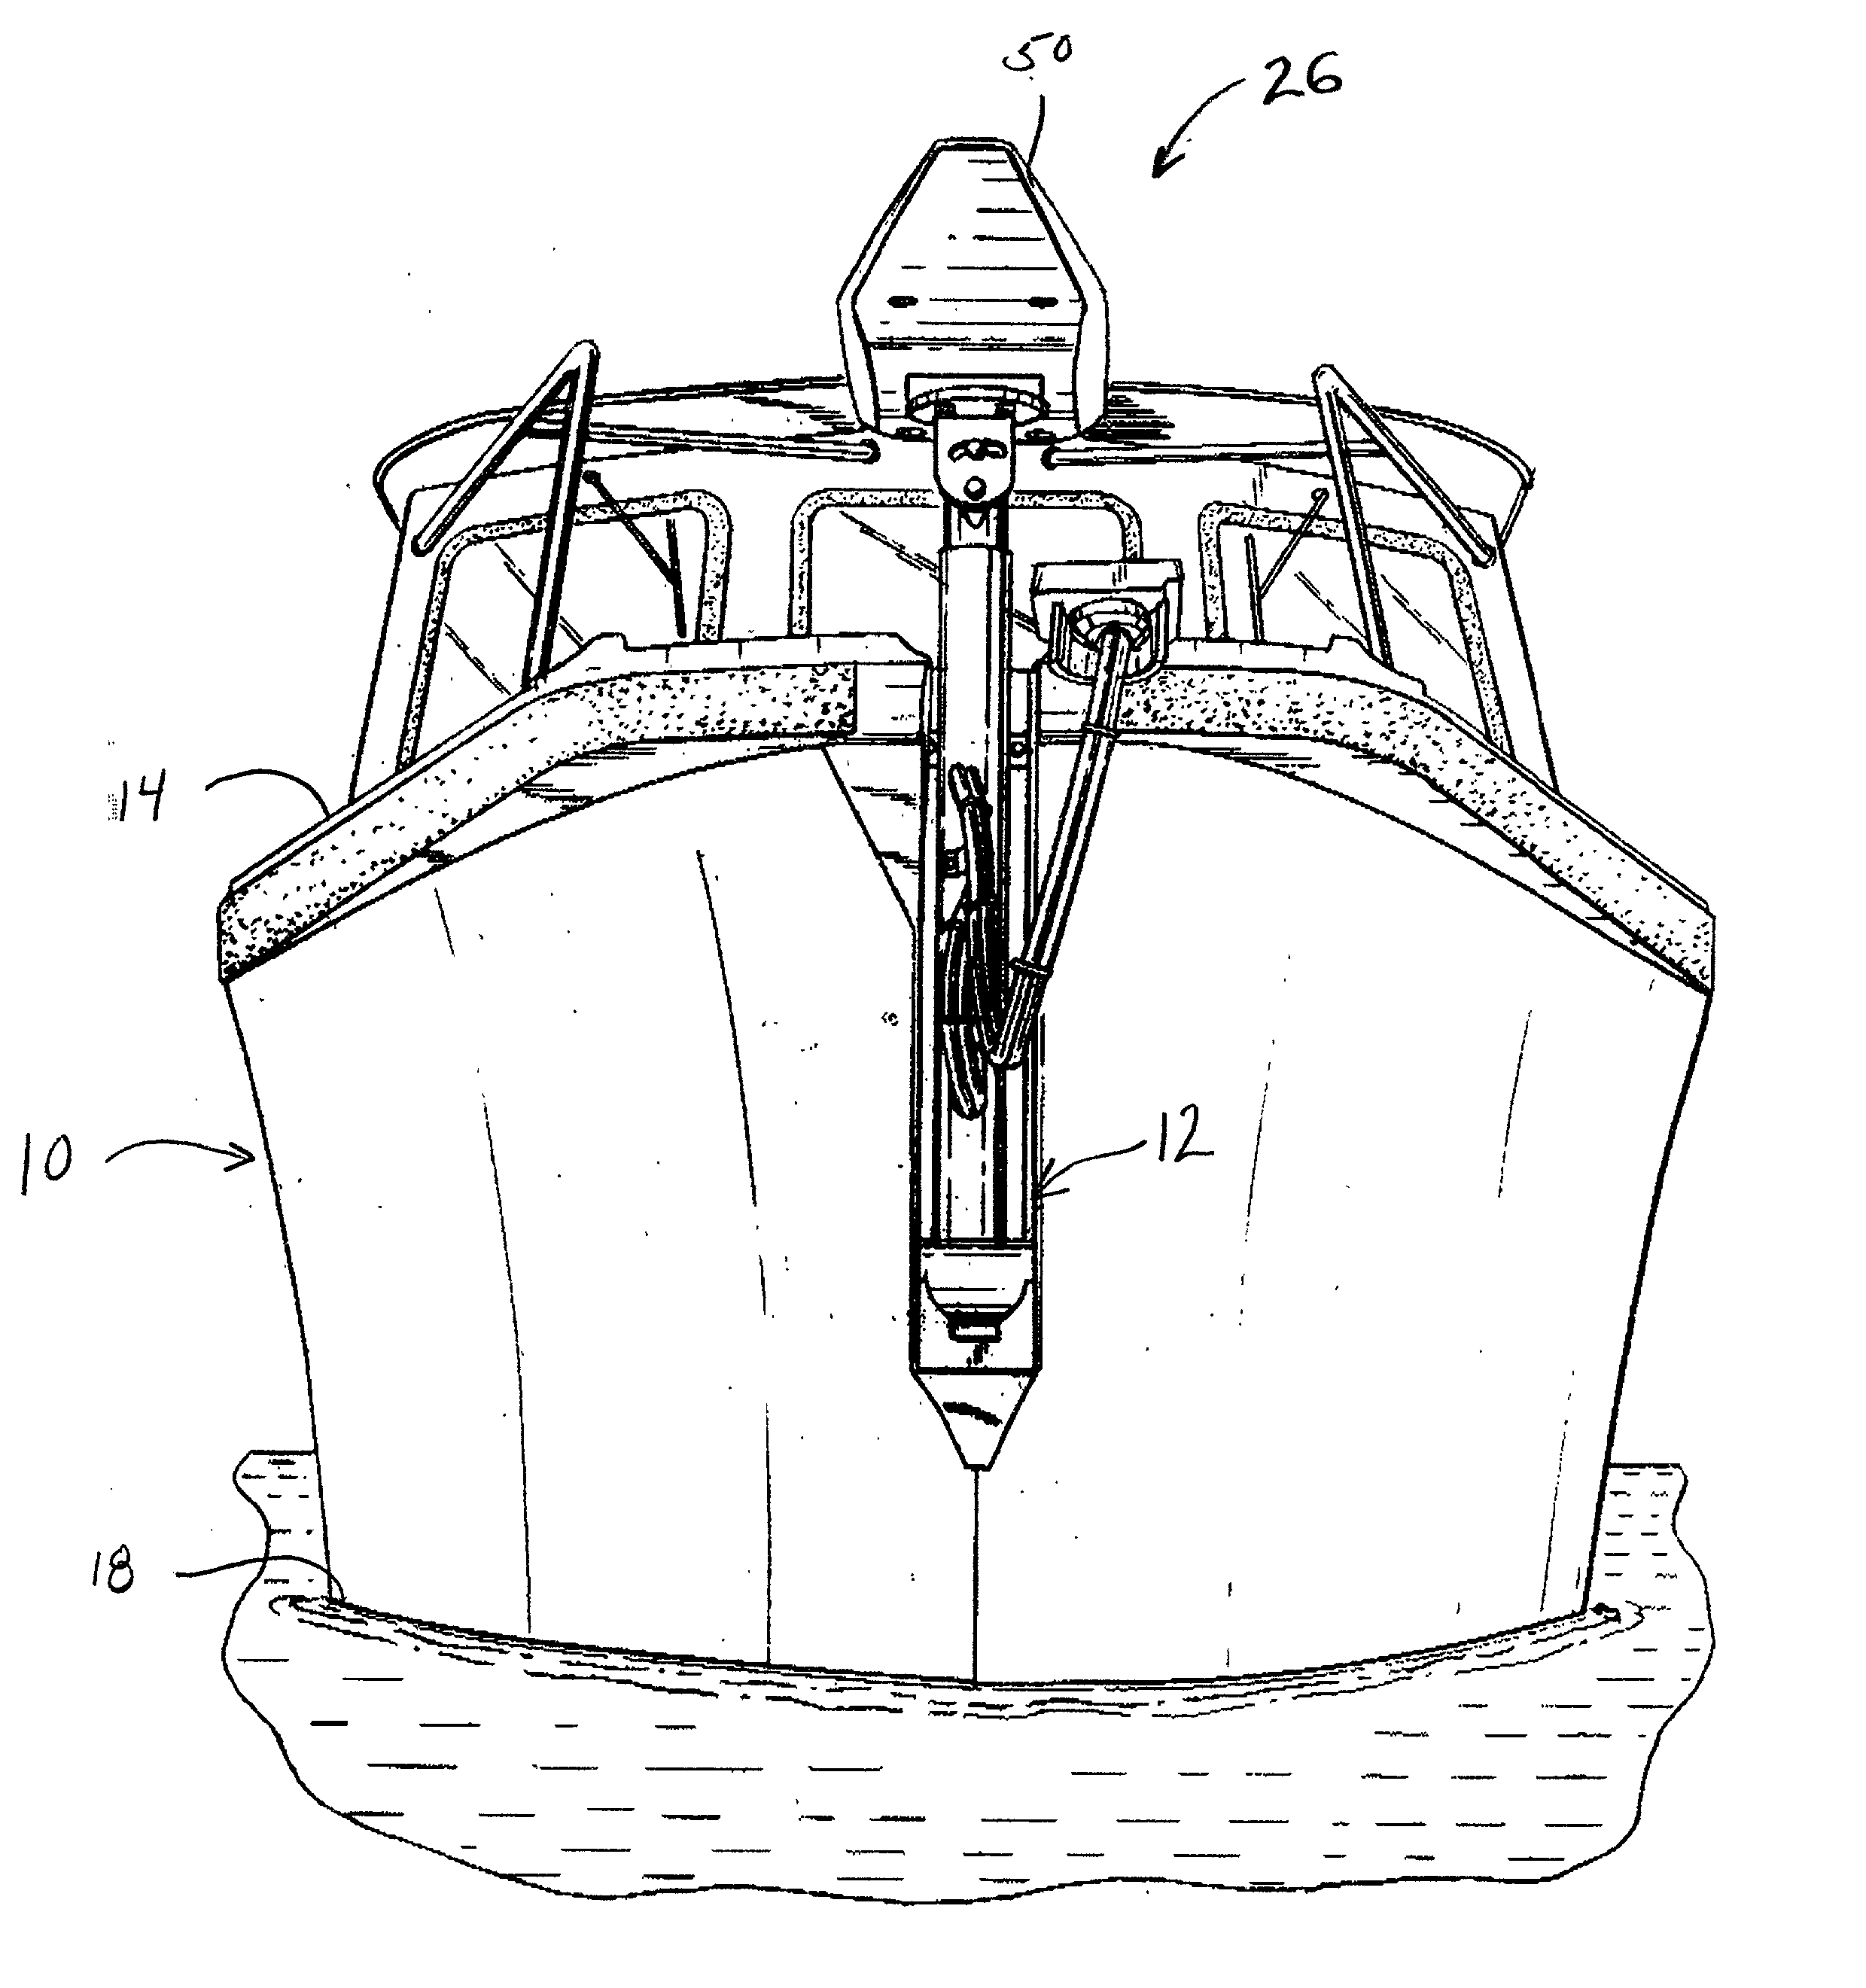 Apparatus and method for the mounting, deployment and use of hydrographic surveying devices